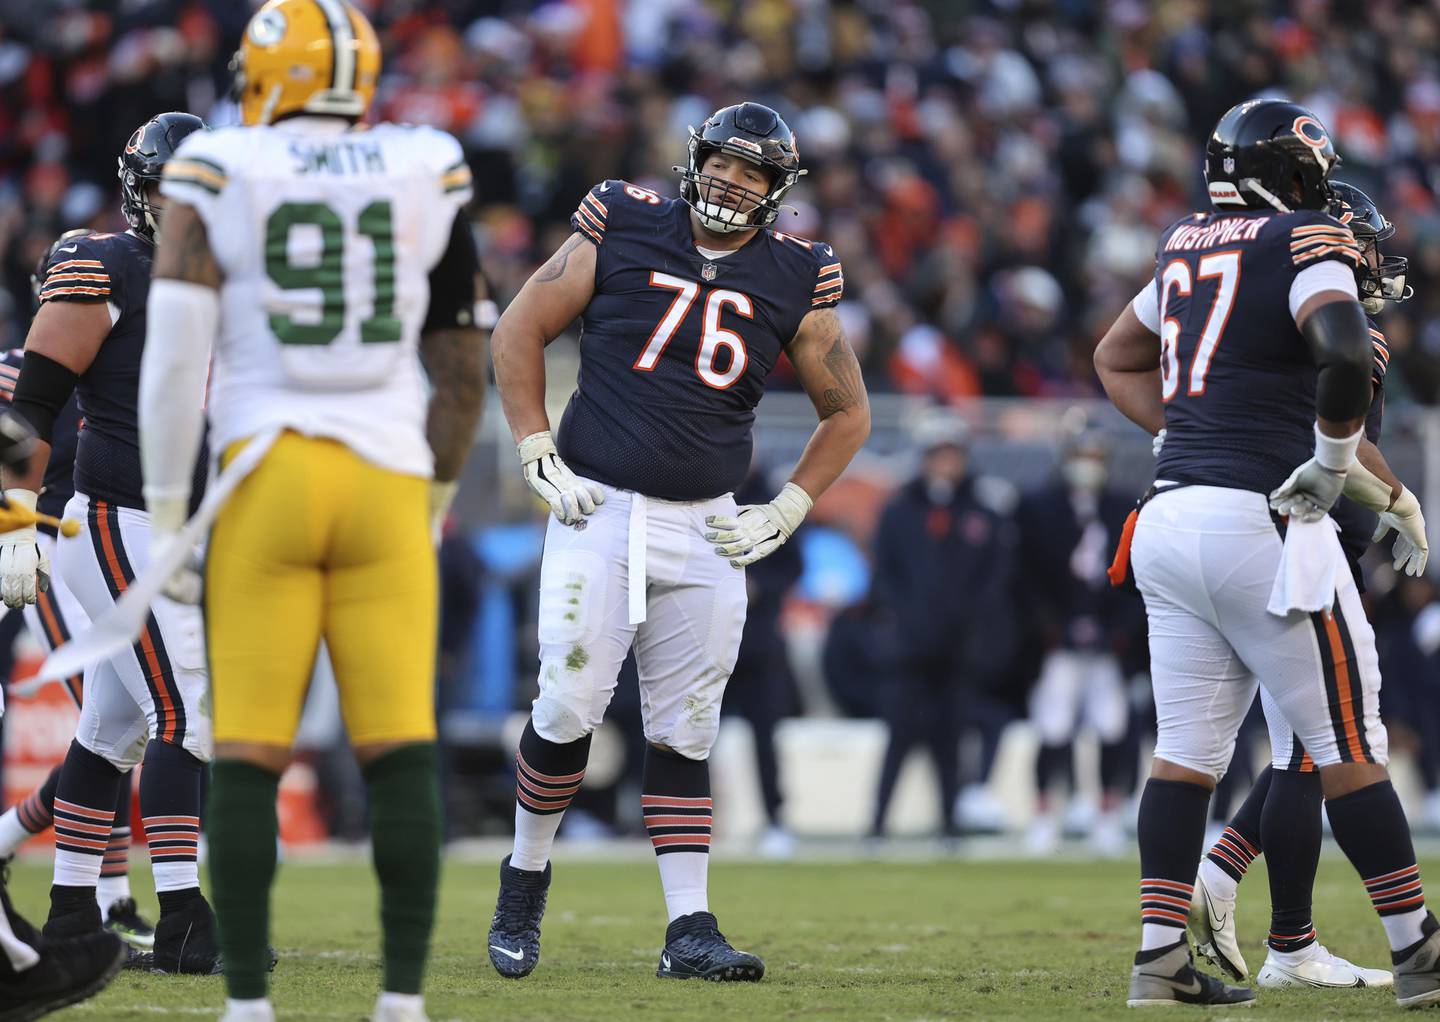 Bears offensive tackle Teven Jenkins reacts after committing a penalty in the third quarter against the Packers at Soldier Field on Dec. 4, 2022.